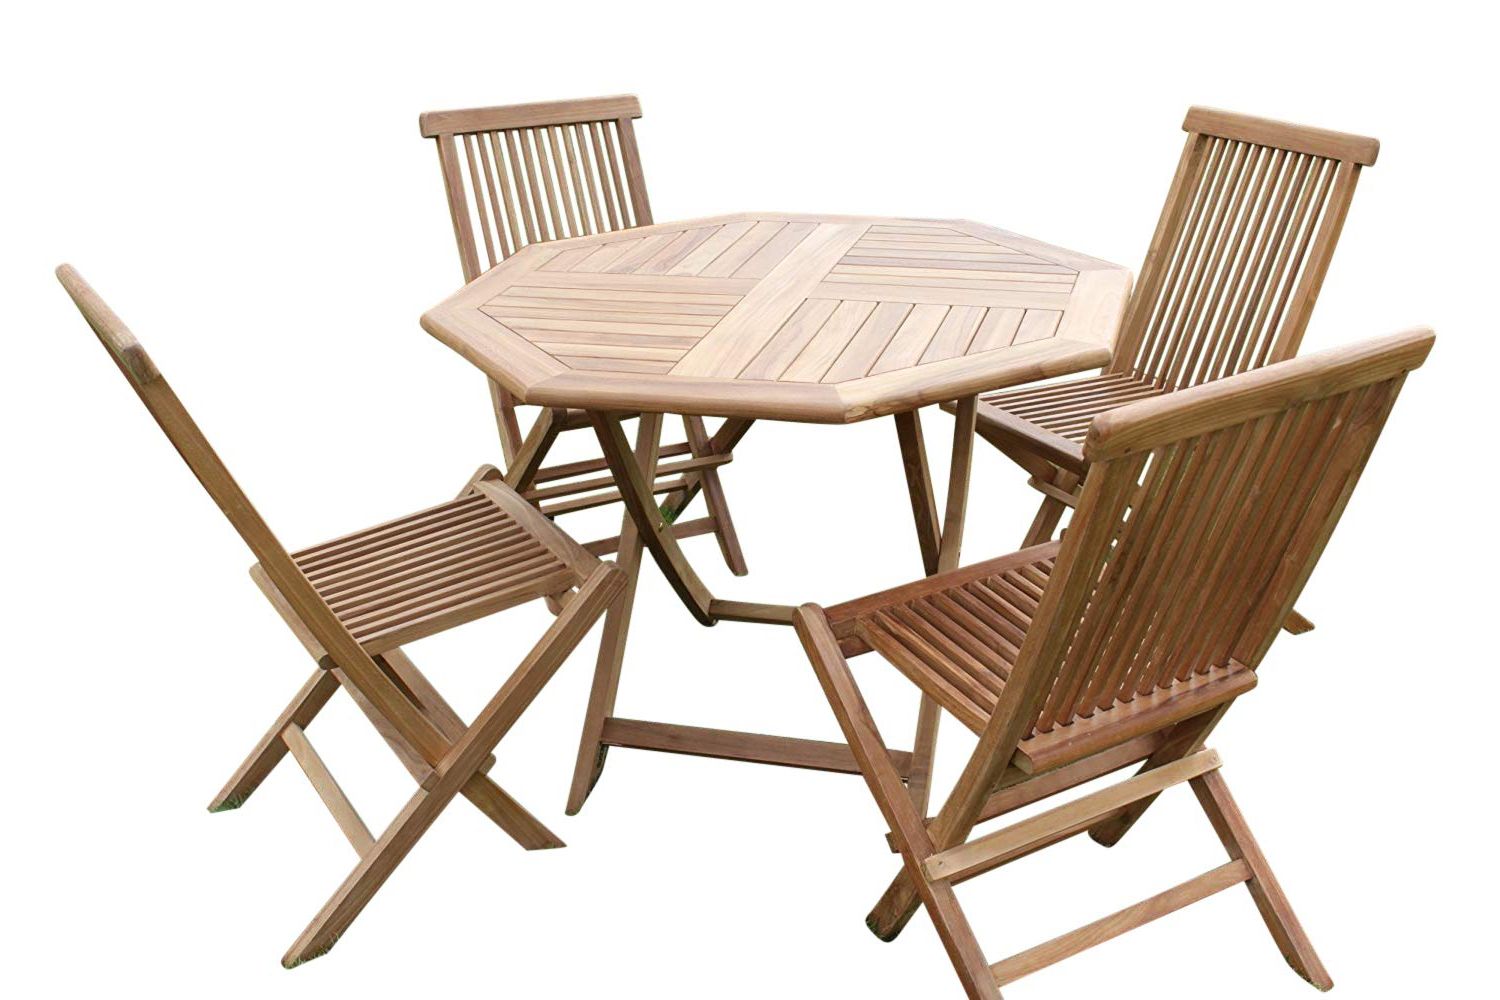 Famous Teak Folding Chair Patio Dining Sets Intended For Solid Teak Octagonal Garden Dining Table And 4 Folding Chairs – Garden (View 4 of 15)